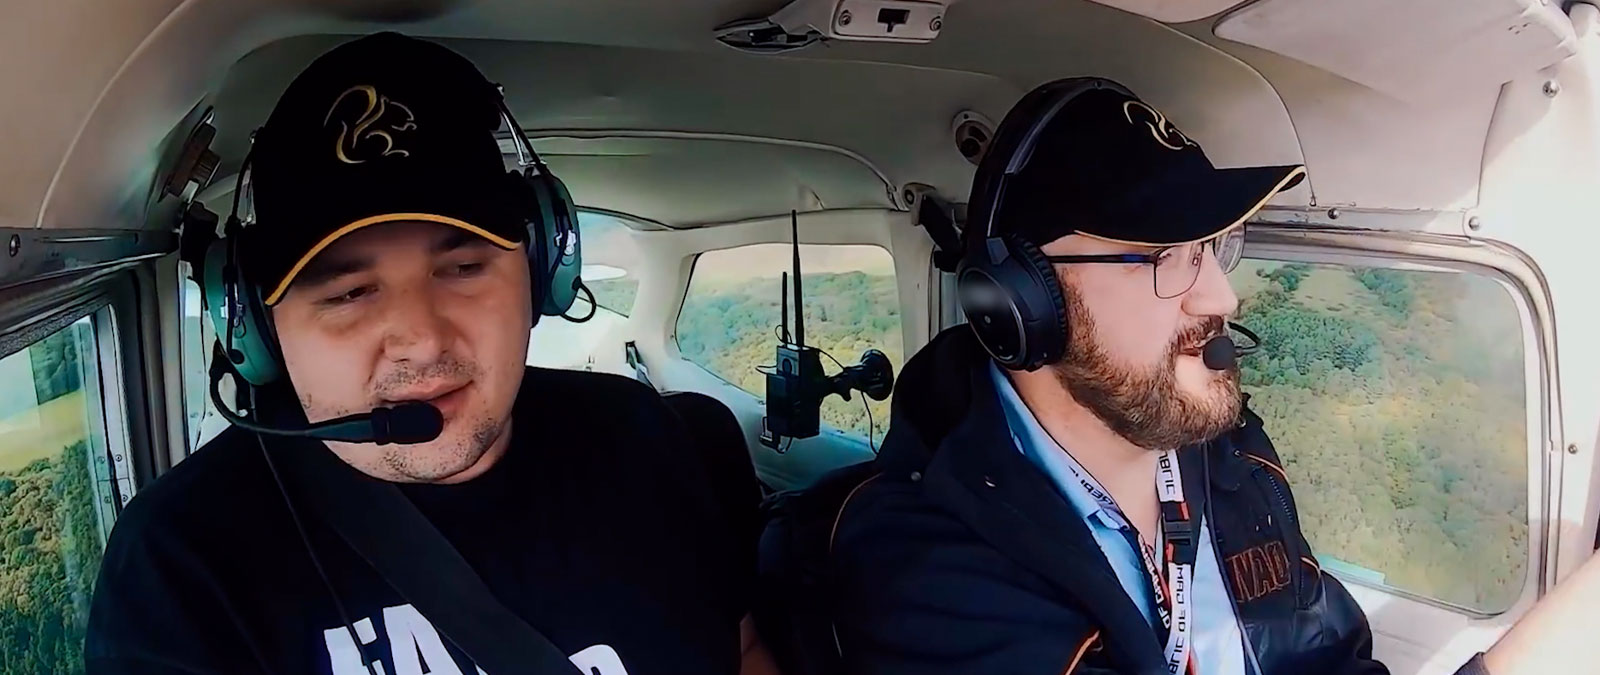 Two people with headsets and hats flying a plane